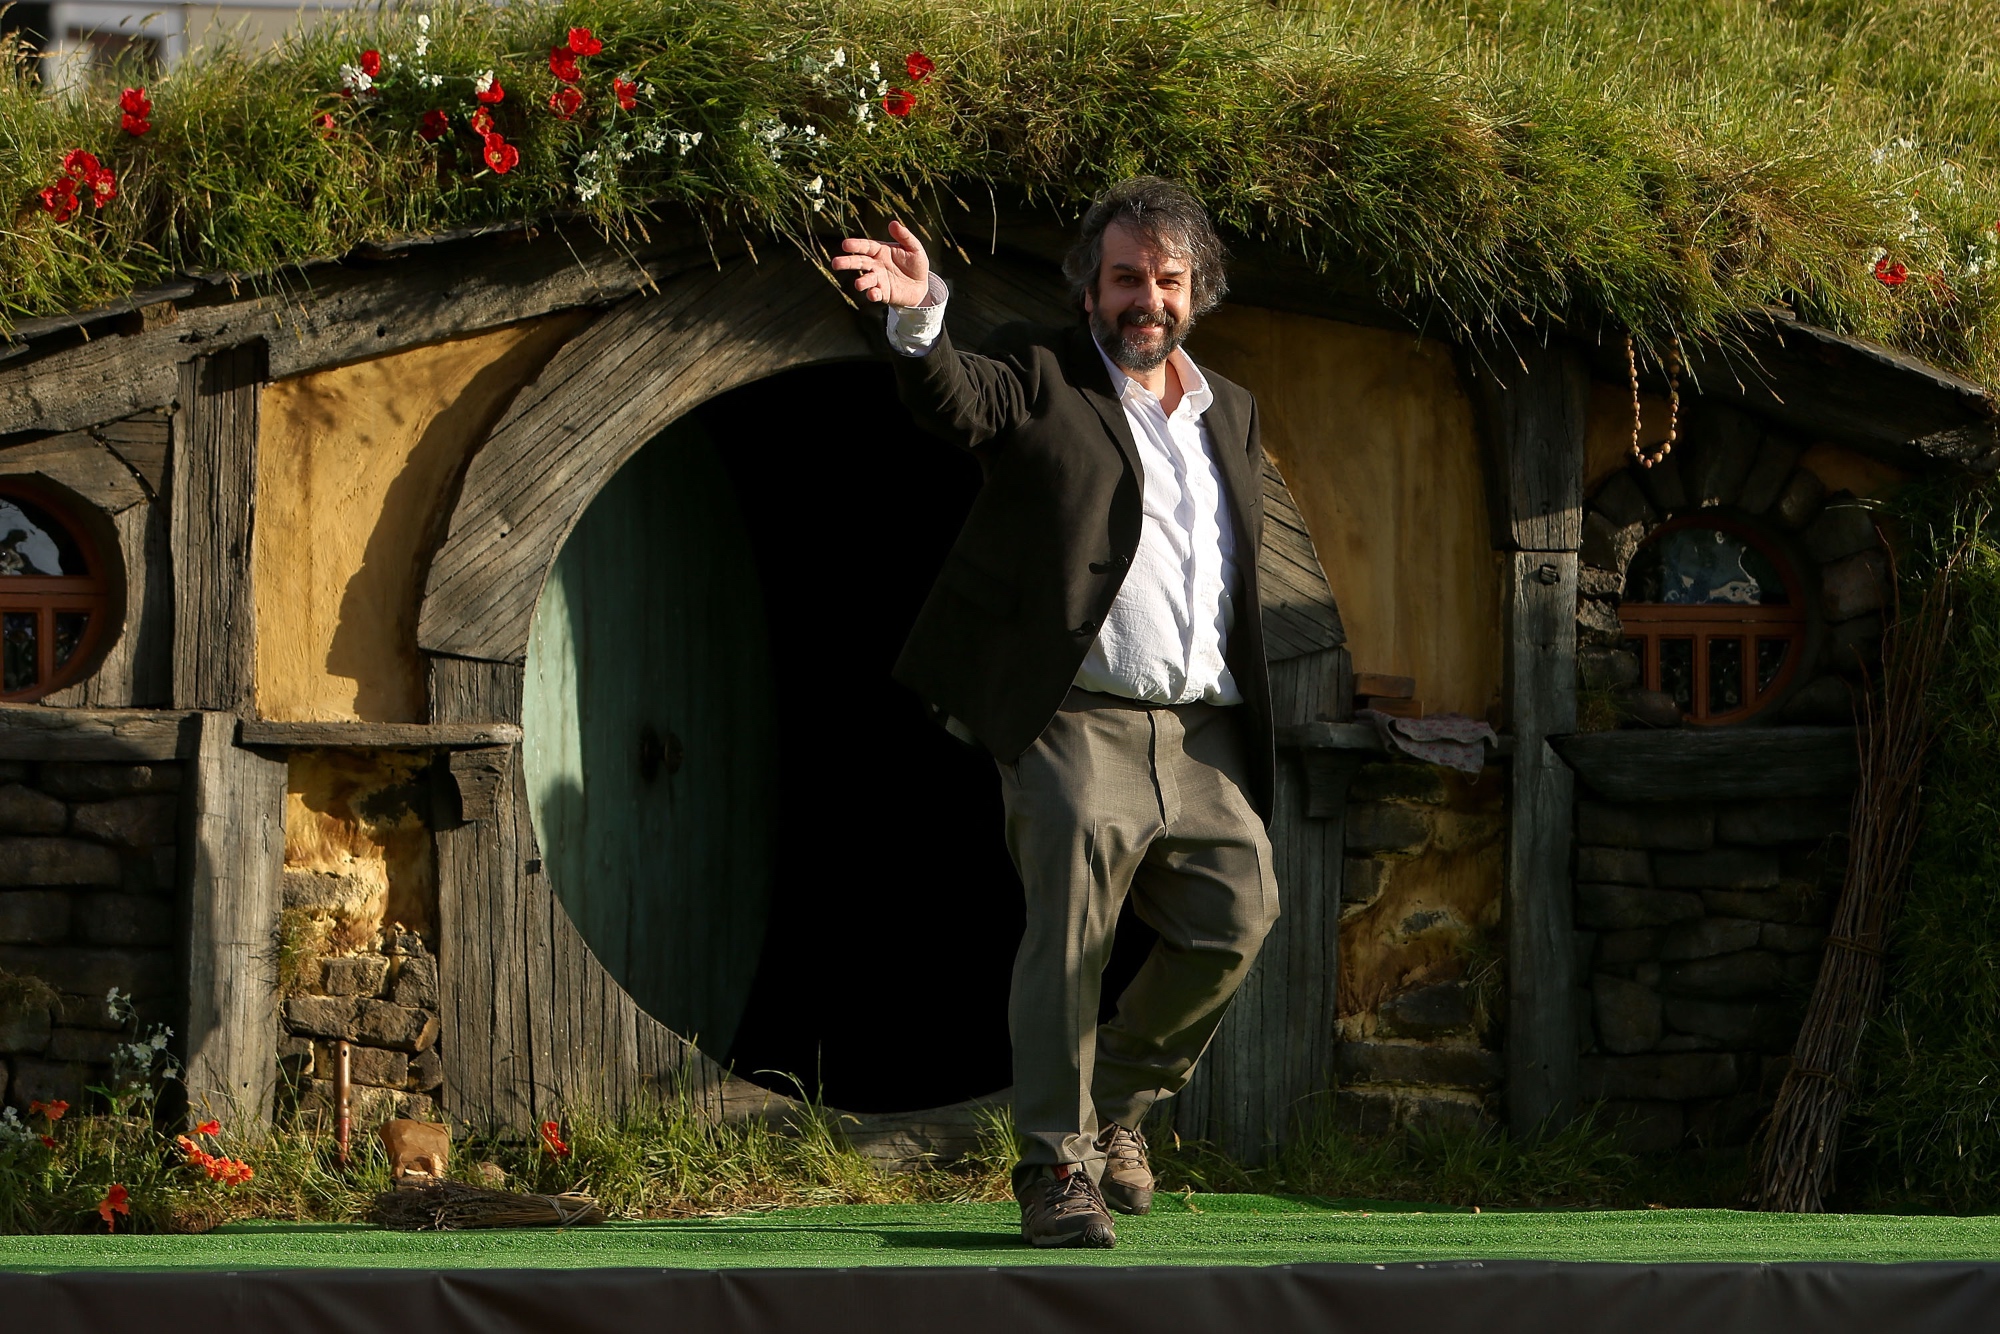 'The Lord of the Rings' Peter Jackson waving in front of a Hobbit home in The Shire